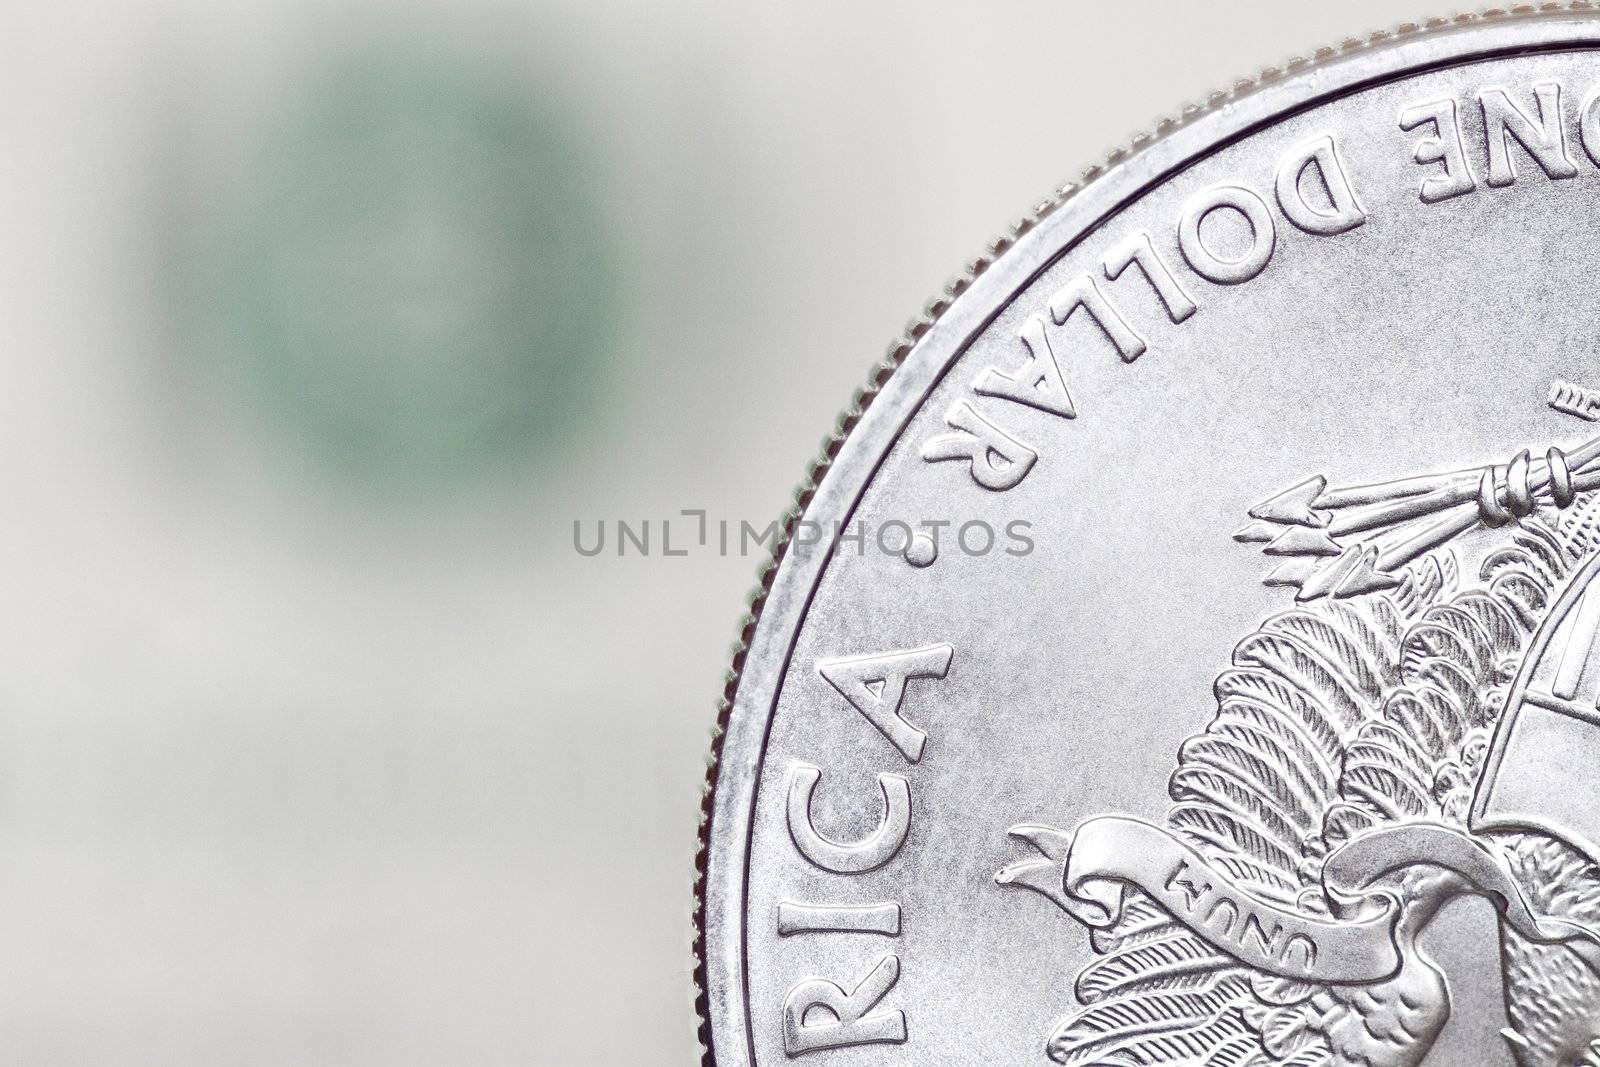 Silver shiny one dollar coin on a blurry background of dollar bill